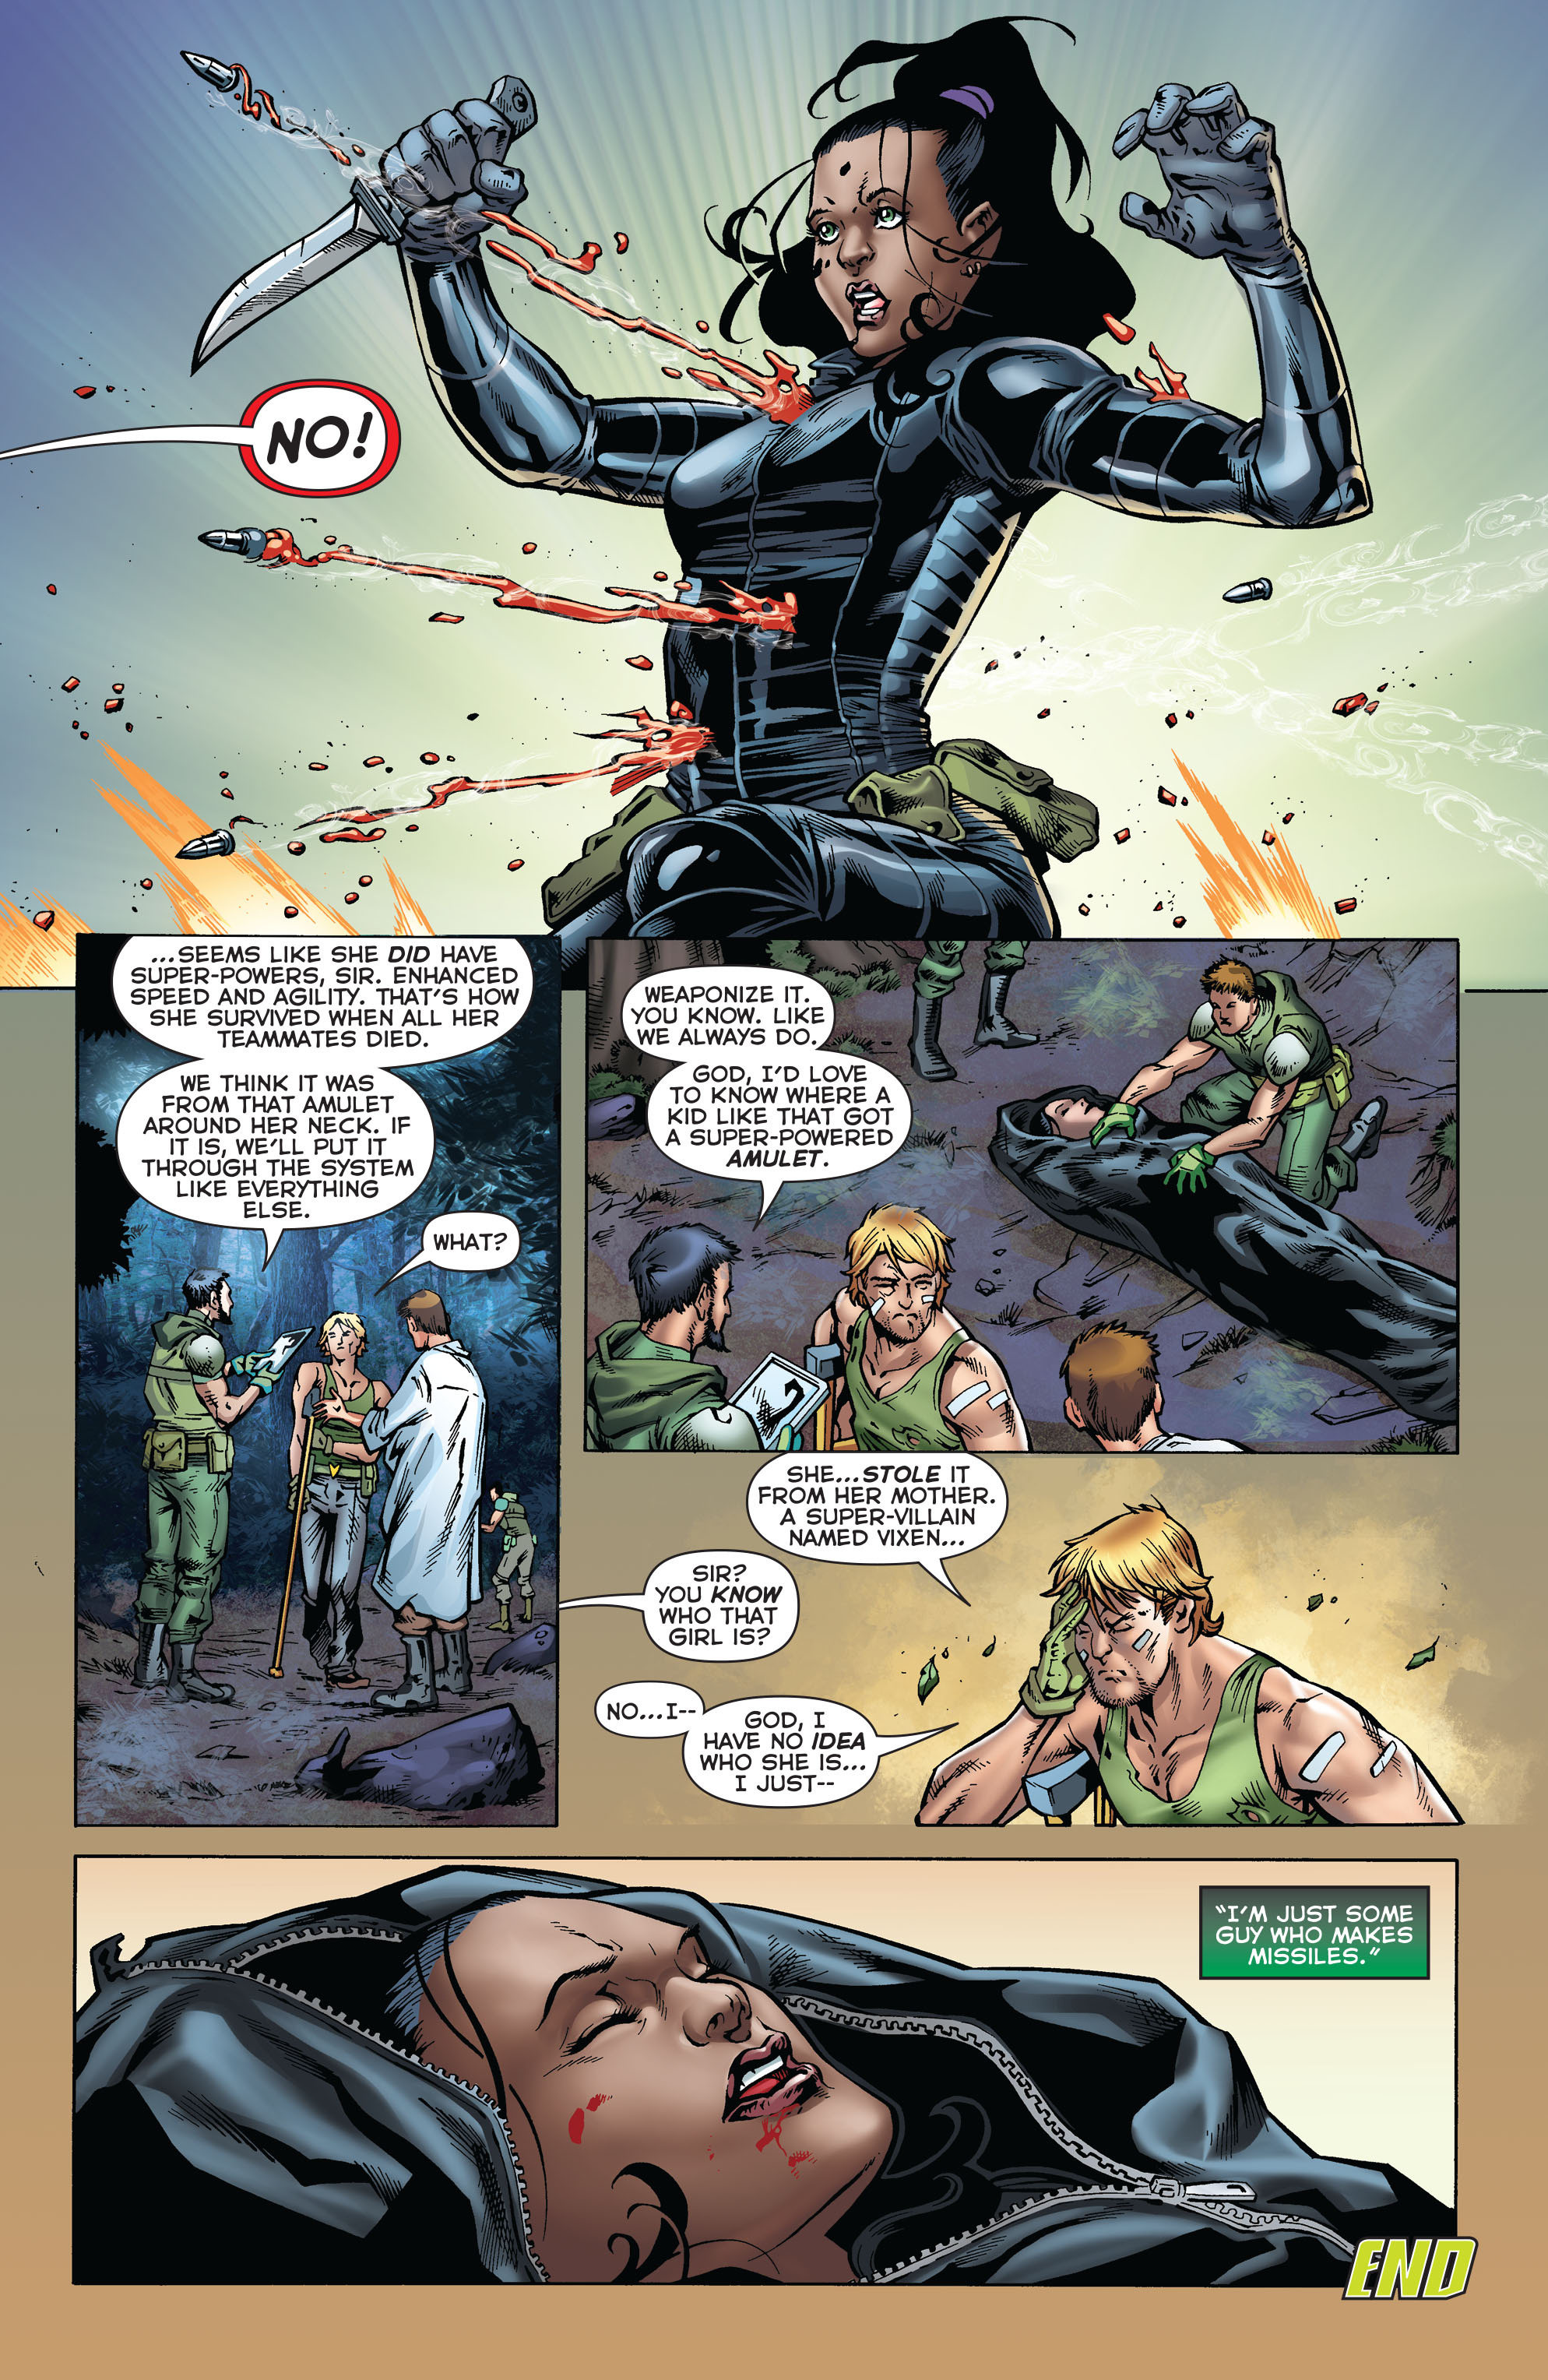 Flashpoint: The World of Flashpoint Featuring Green Lantern Full #1 - English 147